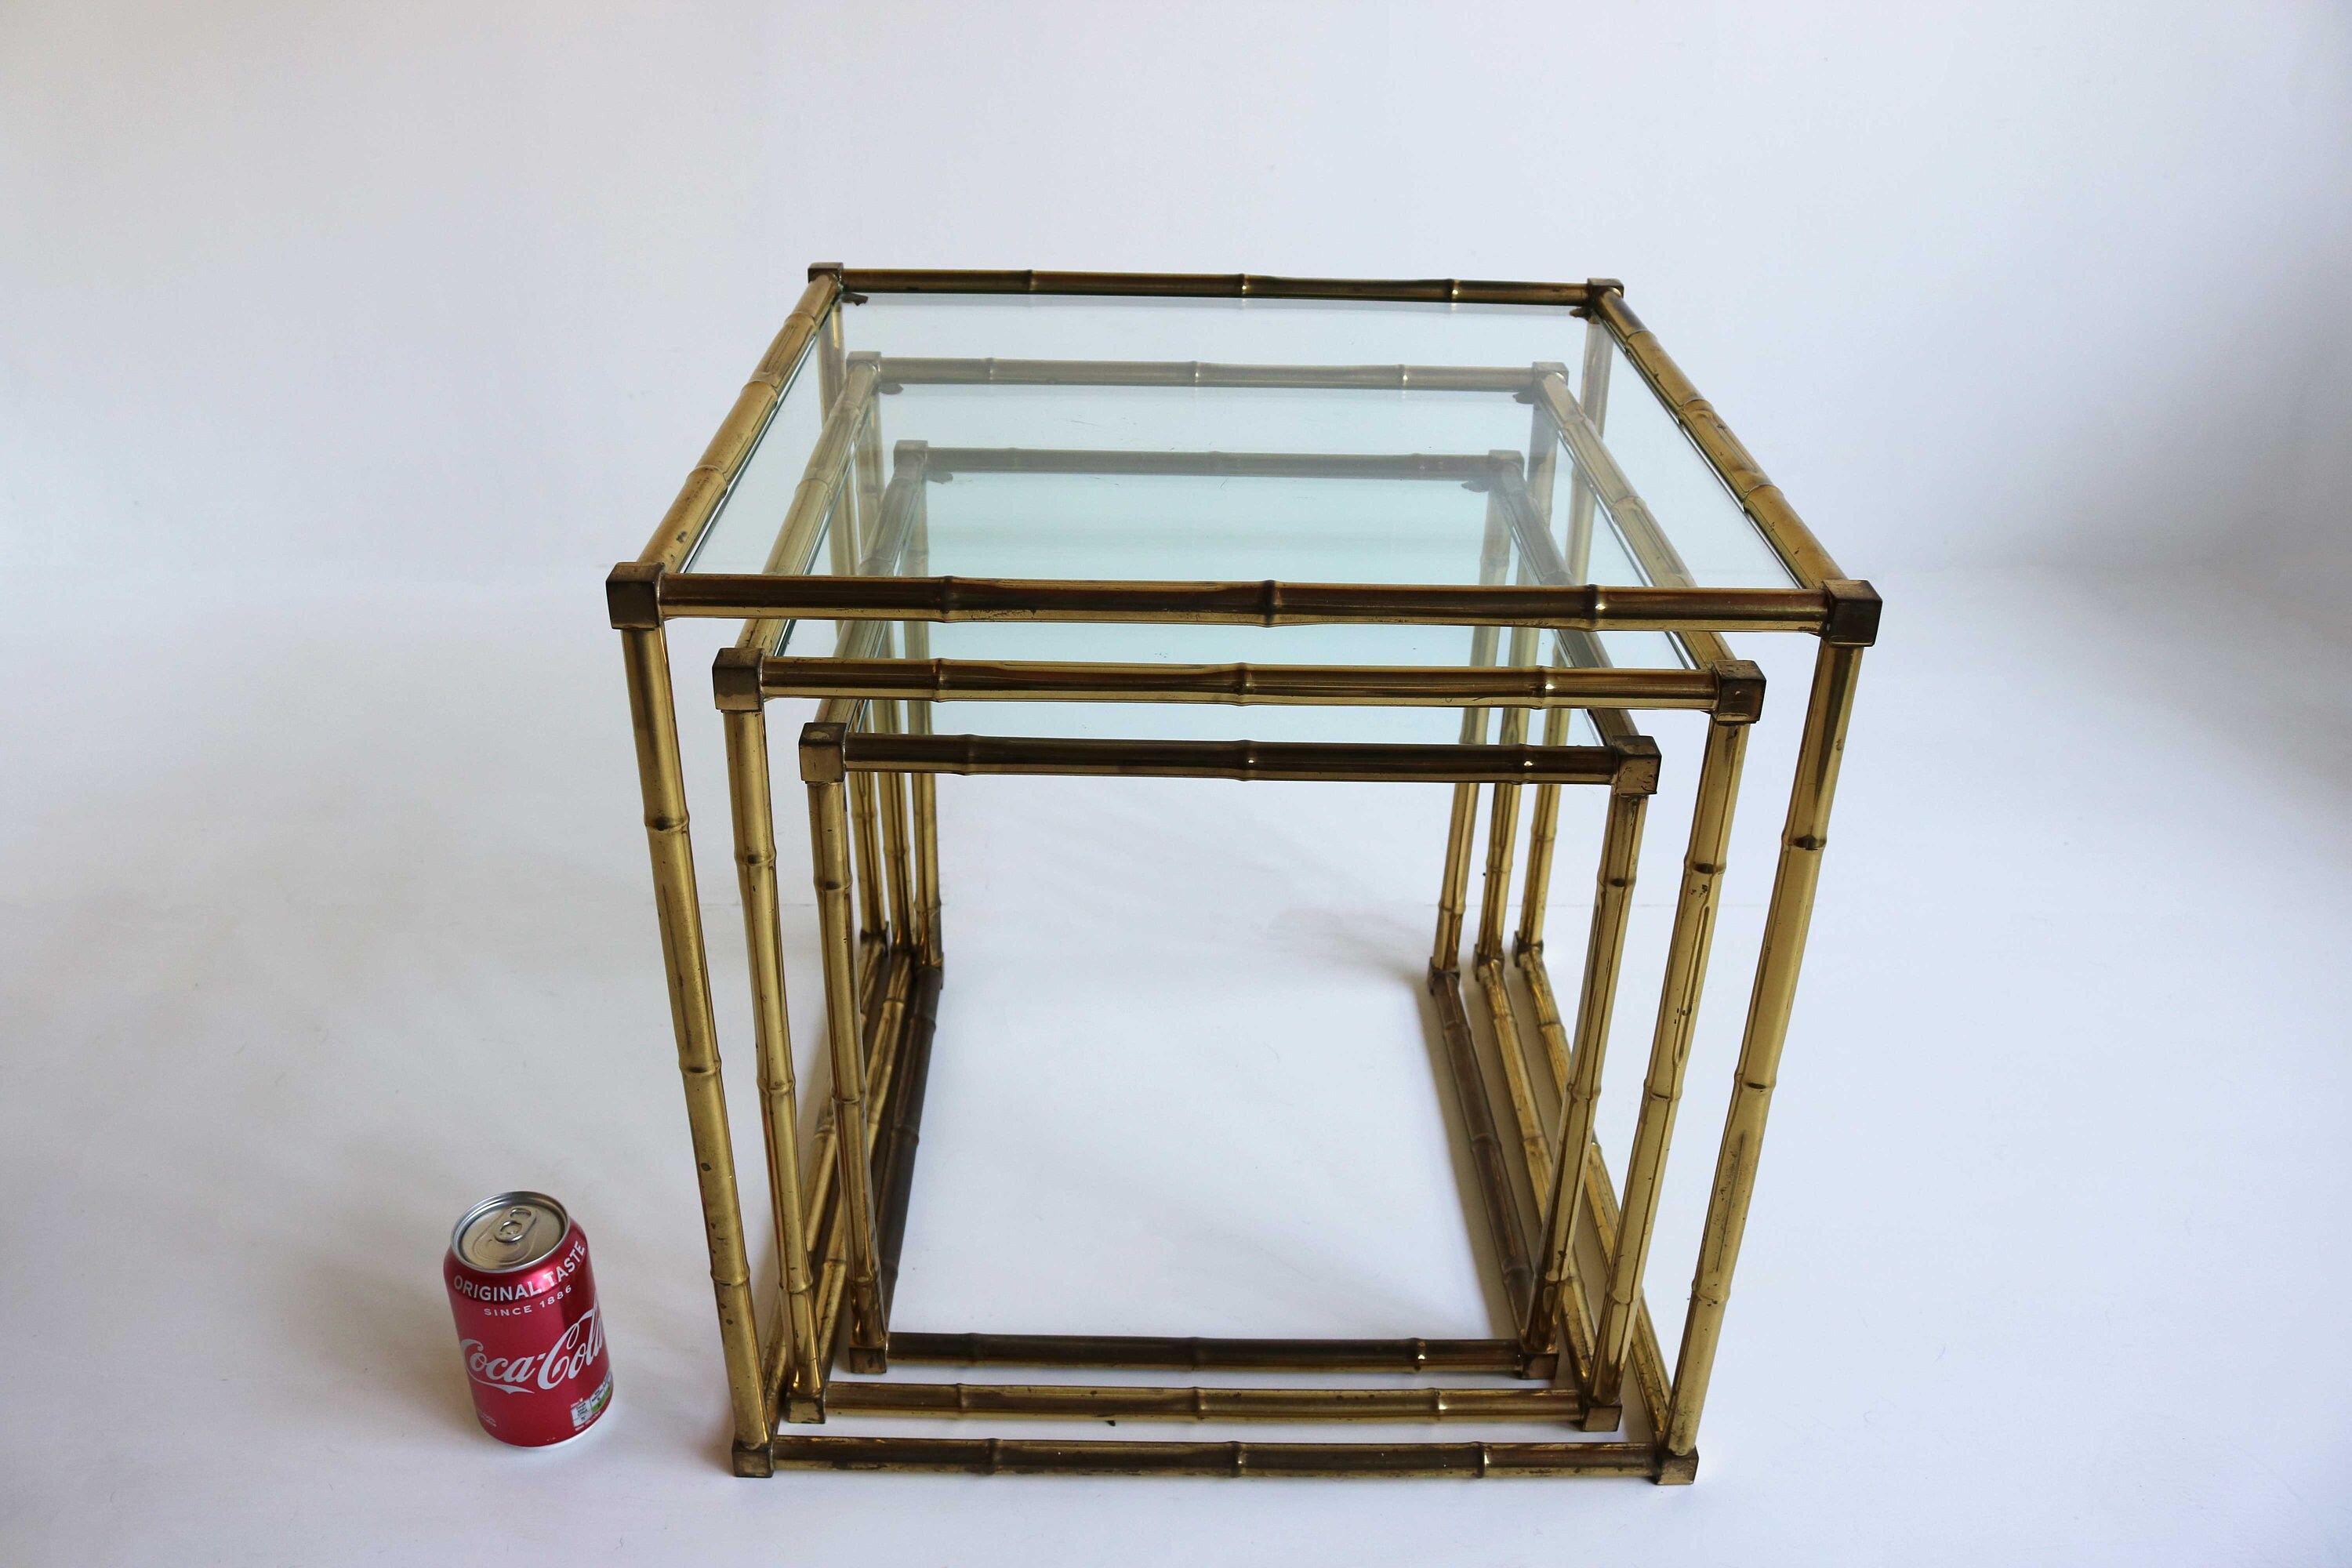 $100 2015 Vintage ROUND Brass FAUX BAMBOO SIDE End TABLE Glass Top  Hollywood Regency, #1784858751